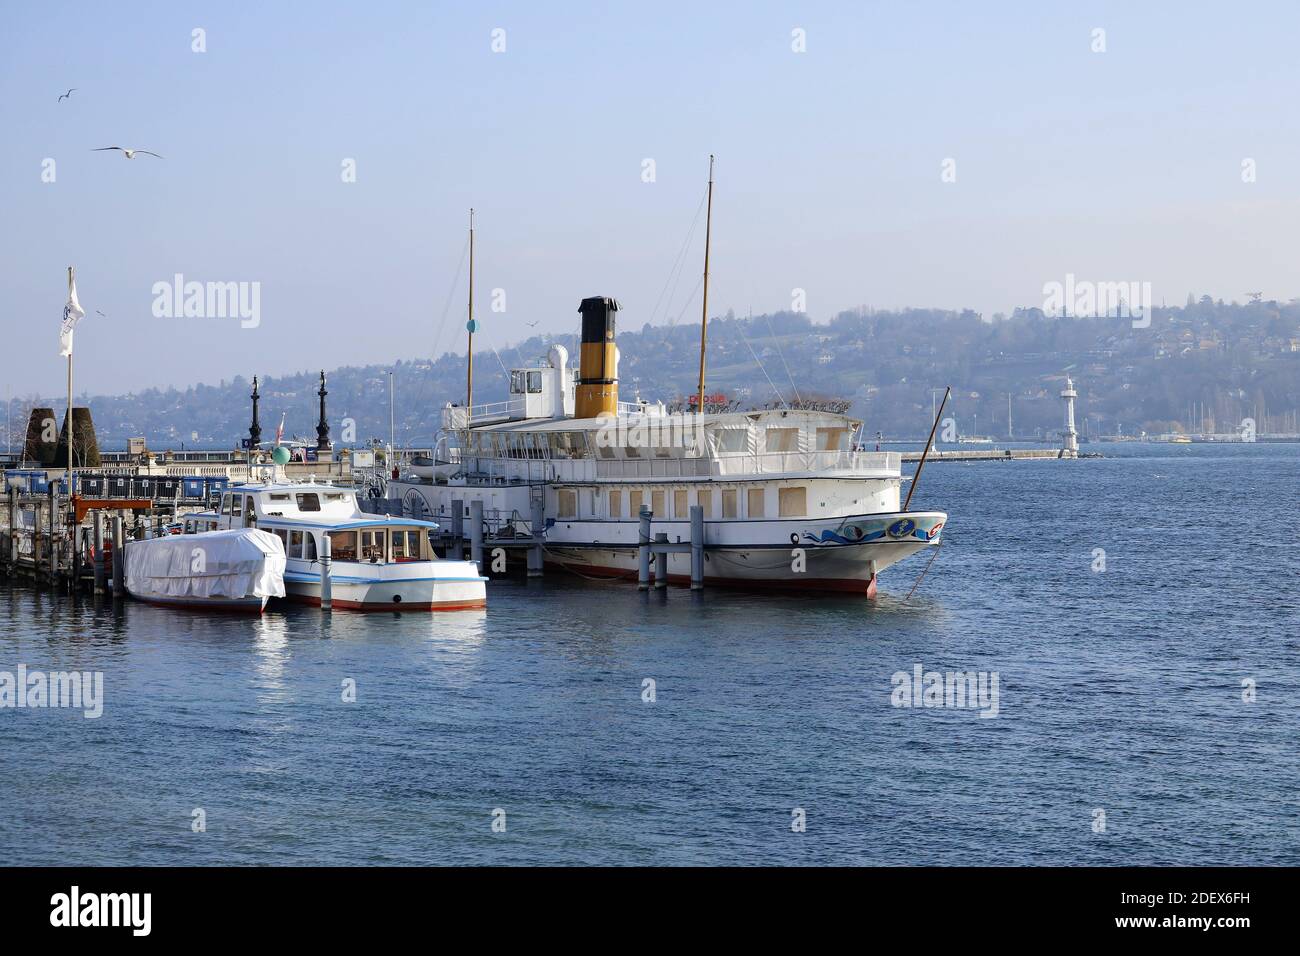 GENEVA, SWITZERLAND - Feb 20, 2018: City trip in Geneva during winter. Picture shows boats on the Lake of Geneva in Switzerland, with mountains in the Stock Photo